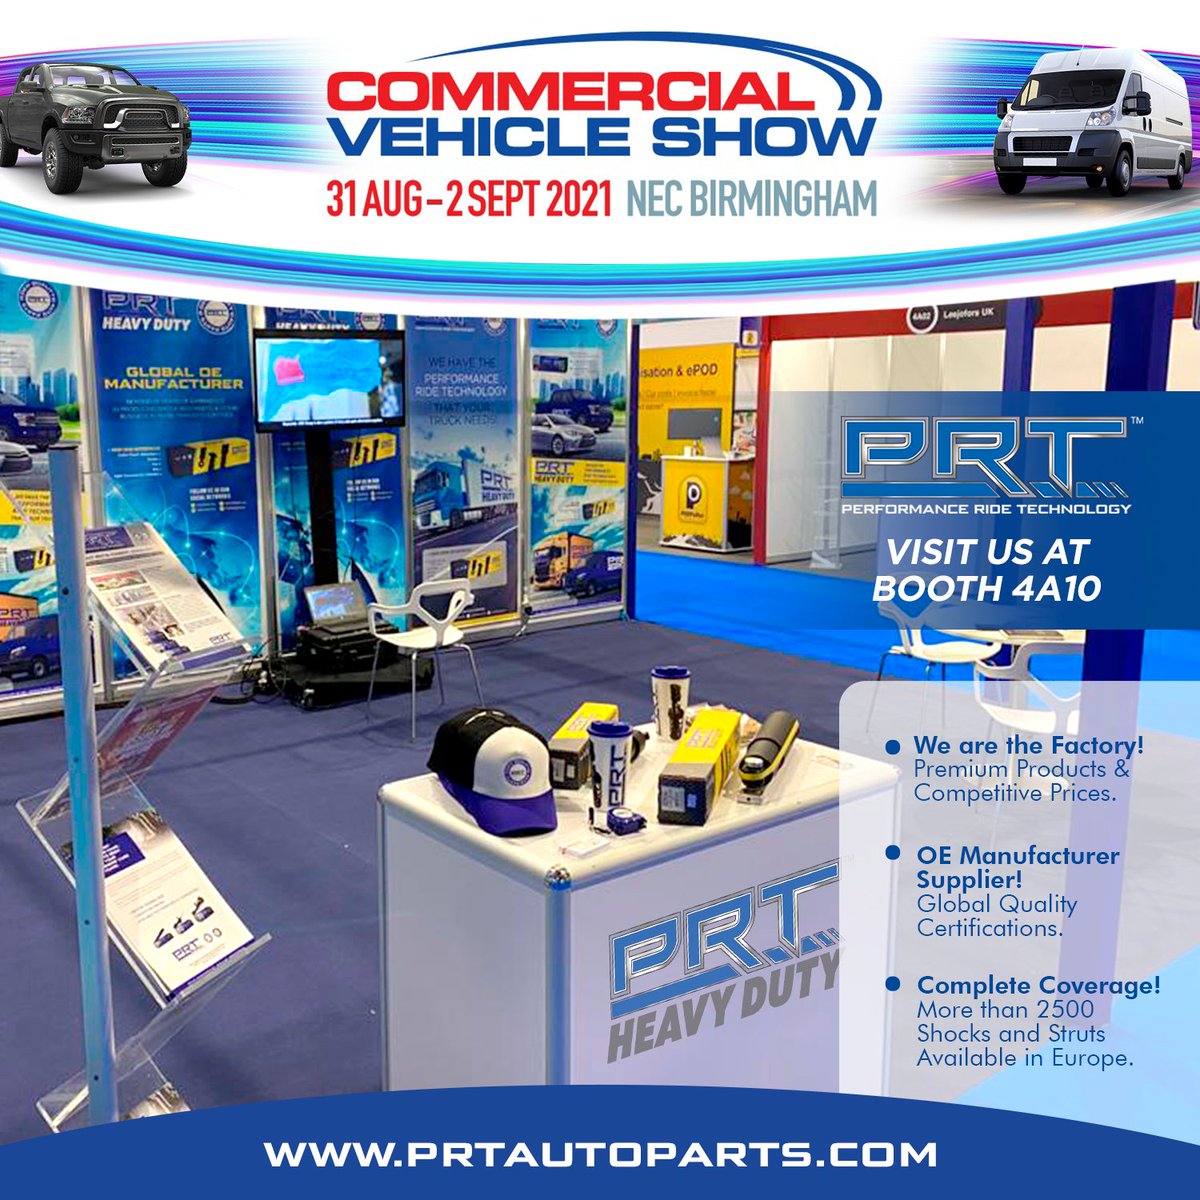 Are you visiting the @TheCVShow at the NEC Birmingham? You are Welcome to come and Visit us at BOOTH 4A10 and find out more about PRT OEM Quality Shocks and Struts! #cvshow #cvshow2021 #commercialvehicleshow #commercialvehicles #cvshow